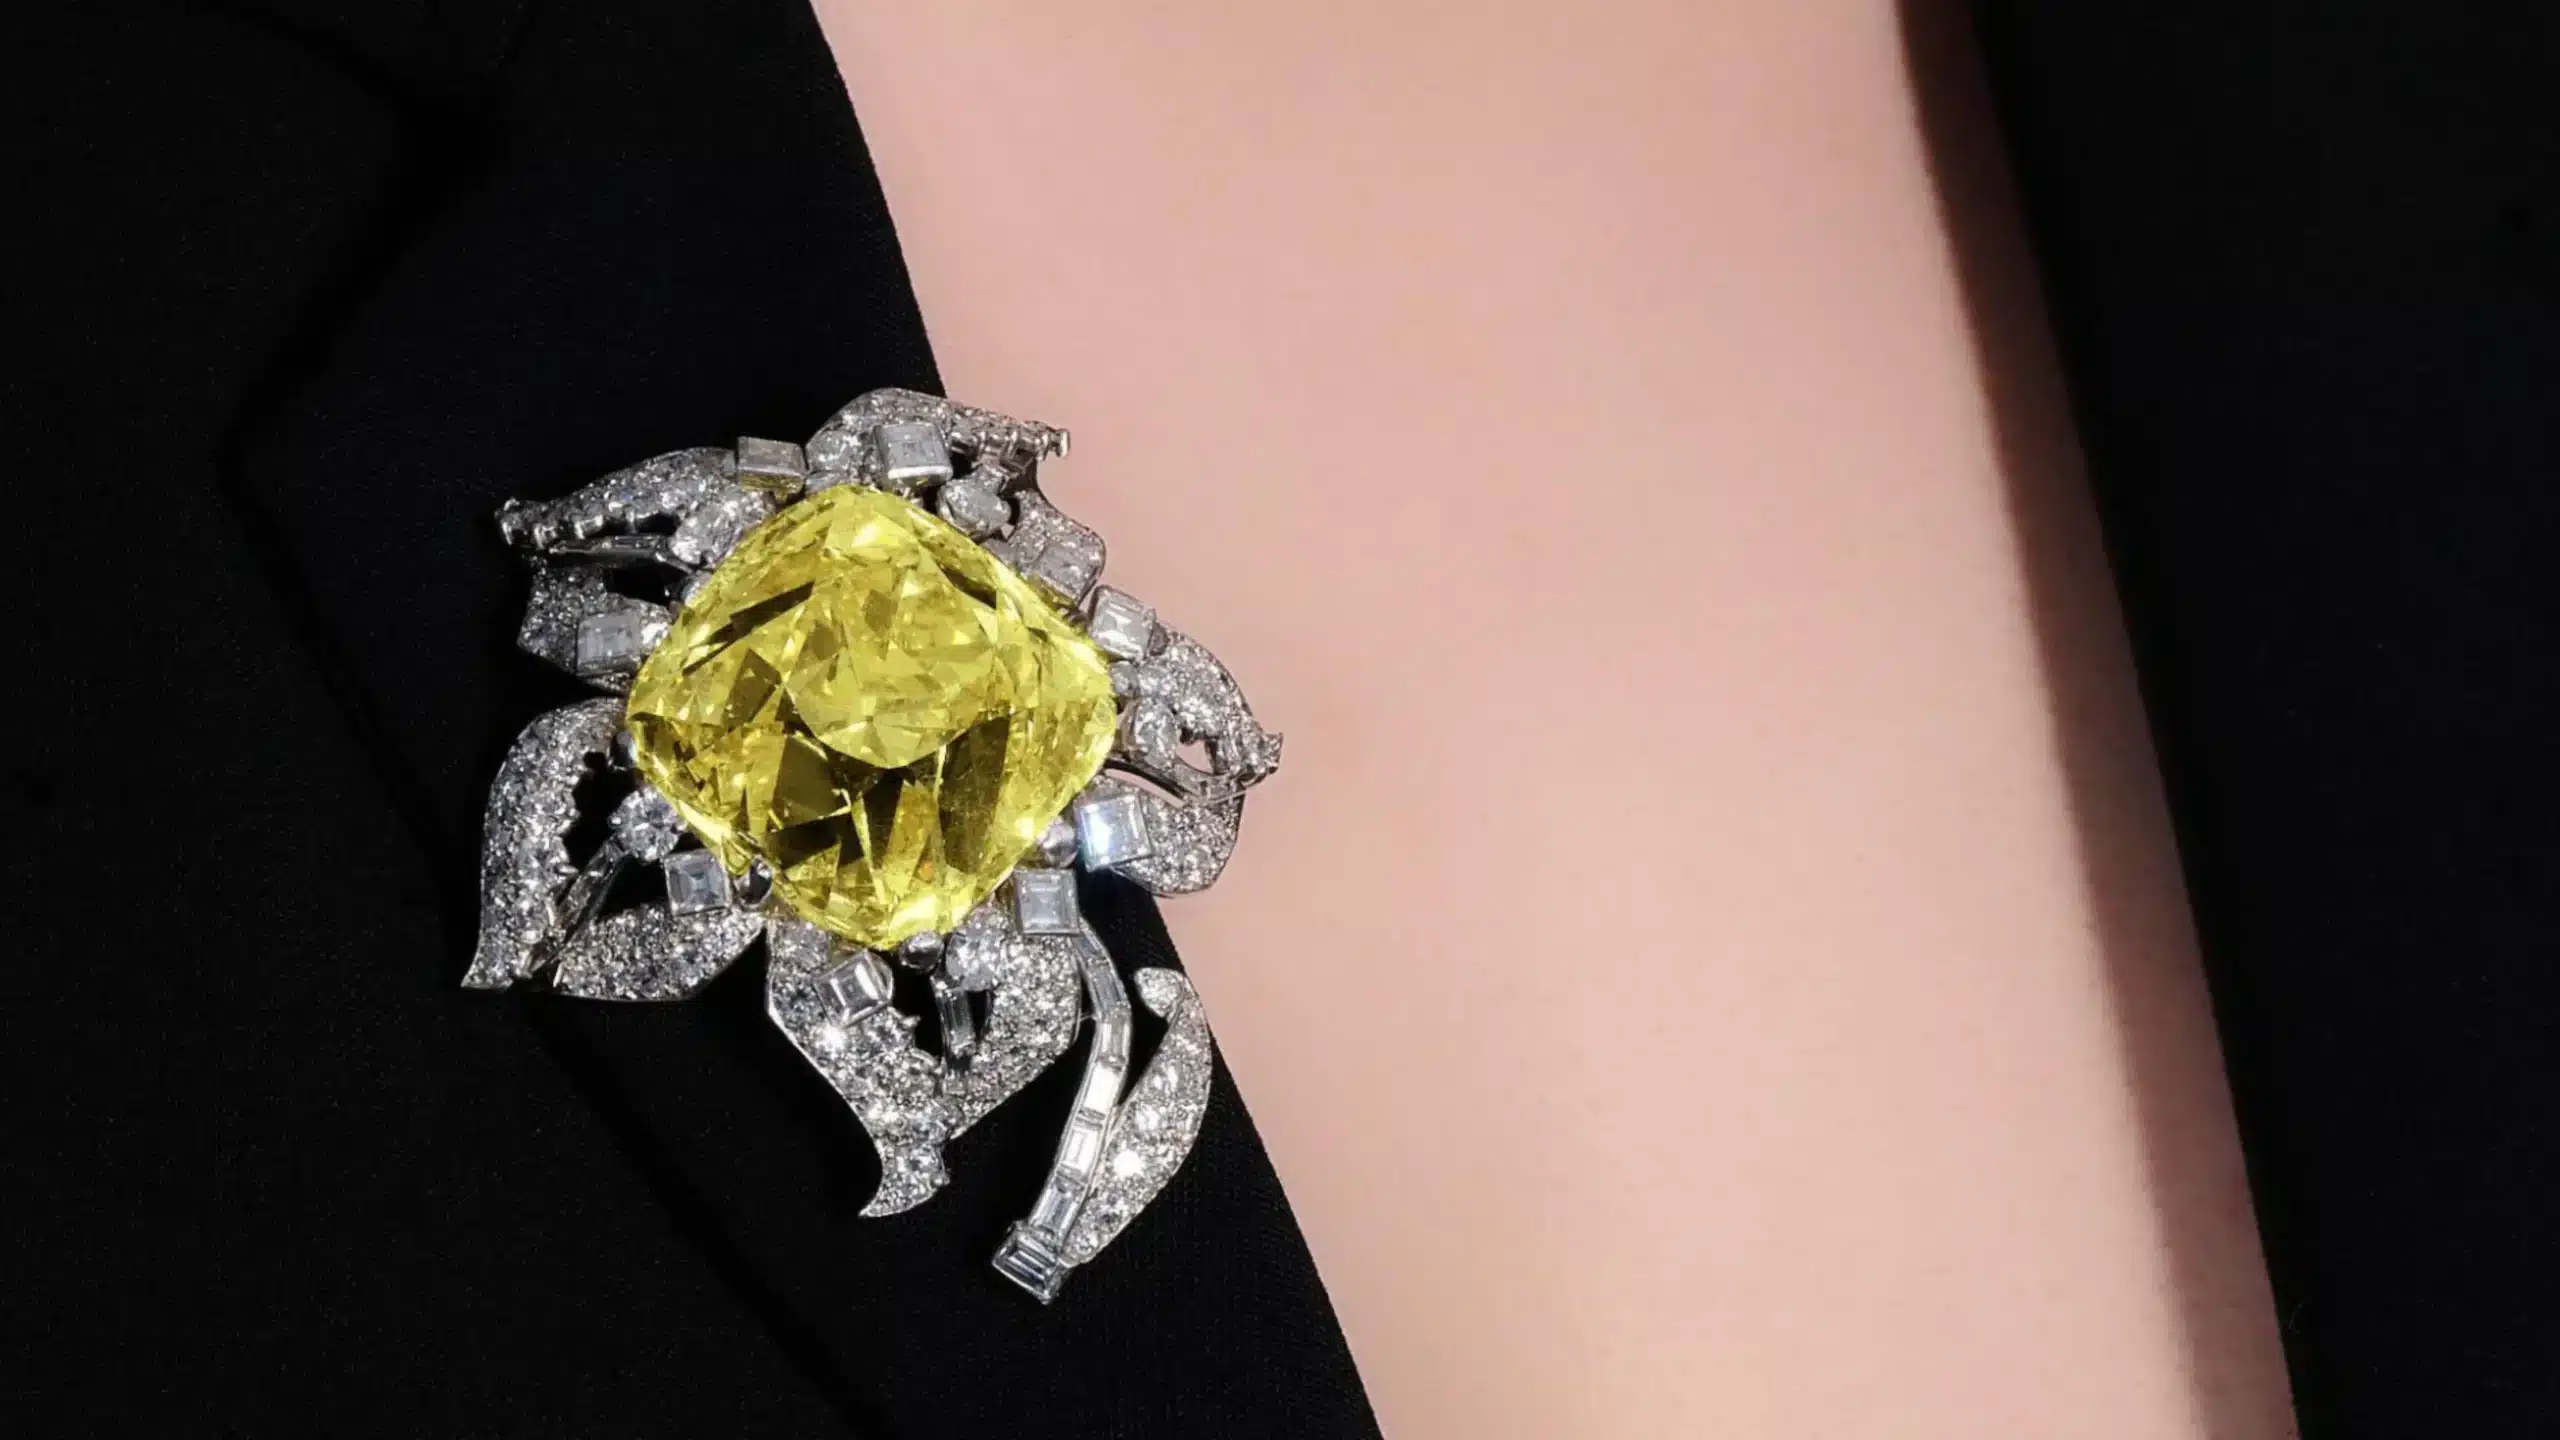 The Allnatt, Historical and Highly Significant Fancy Vivid Yellow diamond and diamond brooch, circa 1952